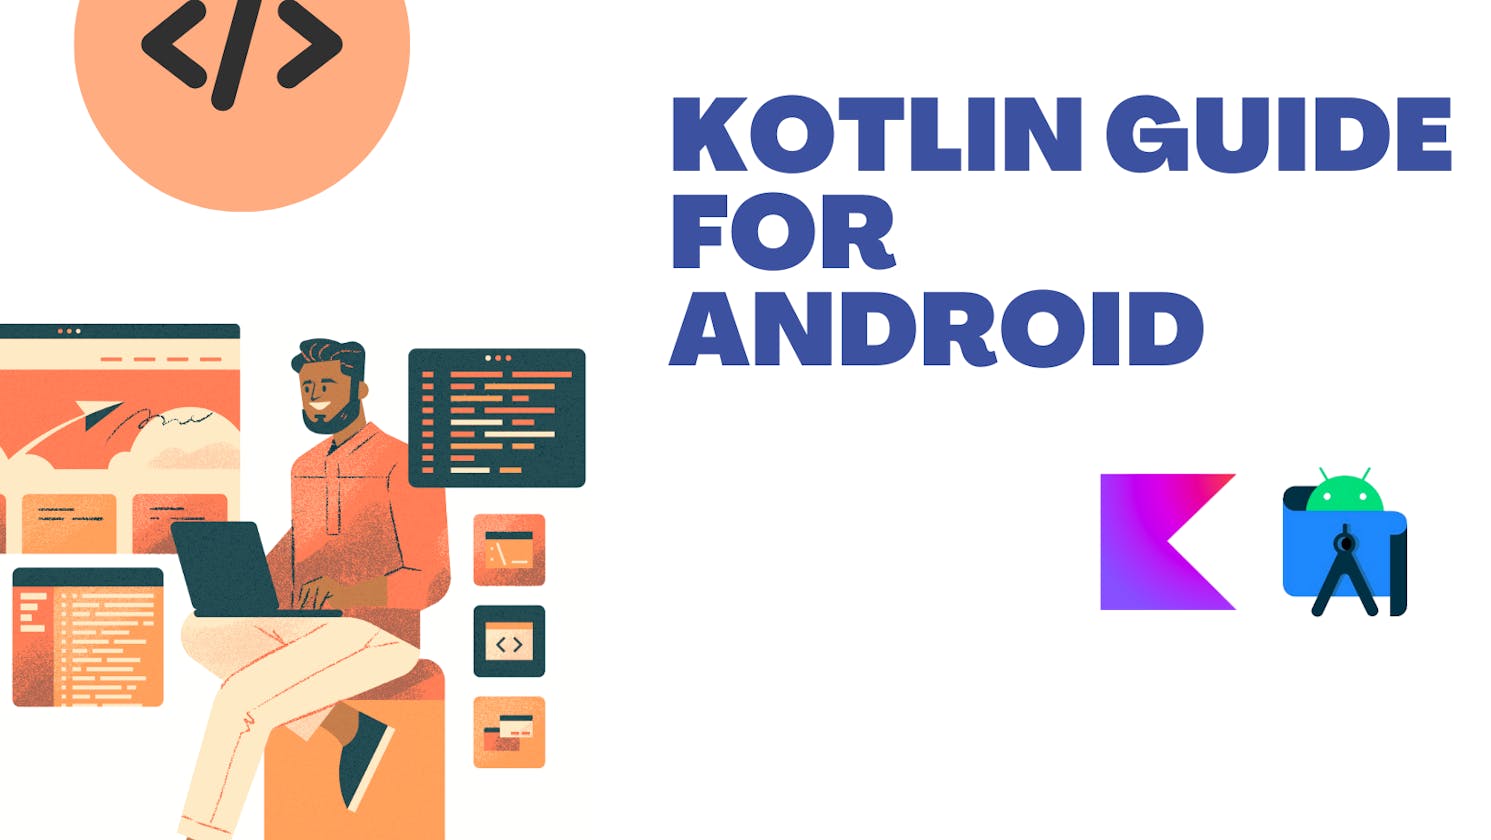 Introduction to Kotlin: Classes, Constructors, Encapsulation, Inheritance, and Interfaces